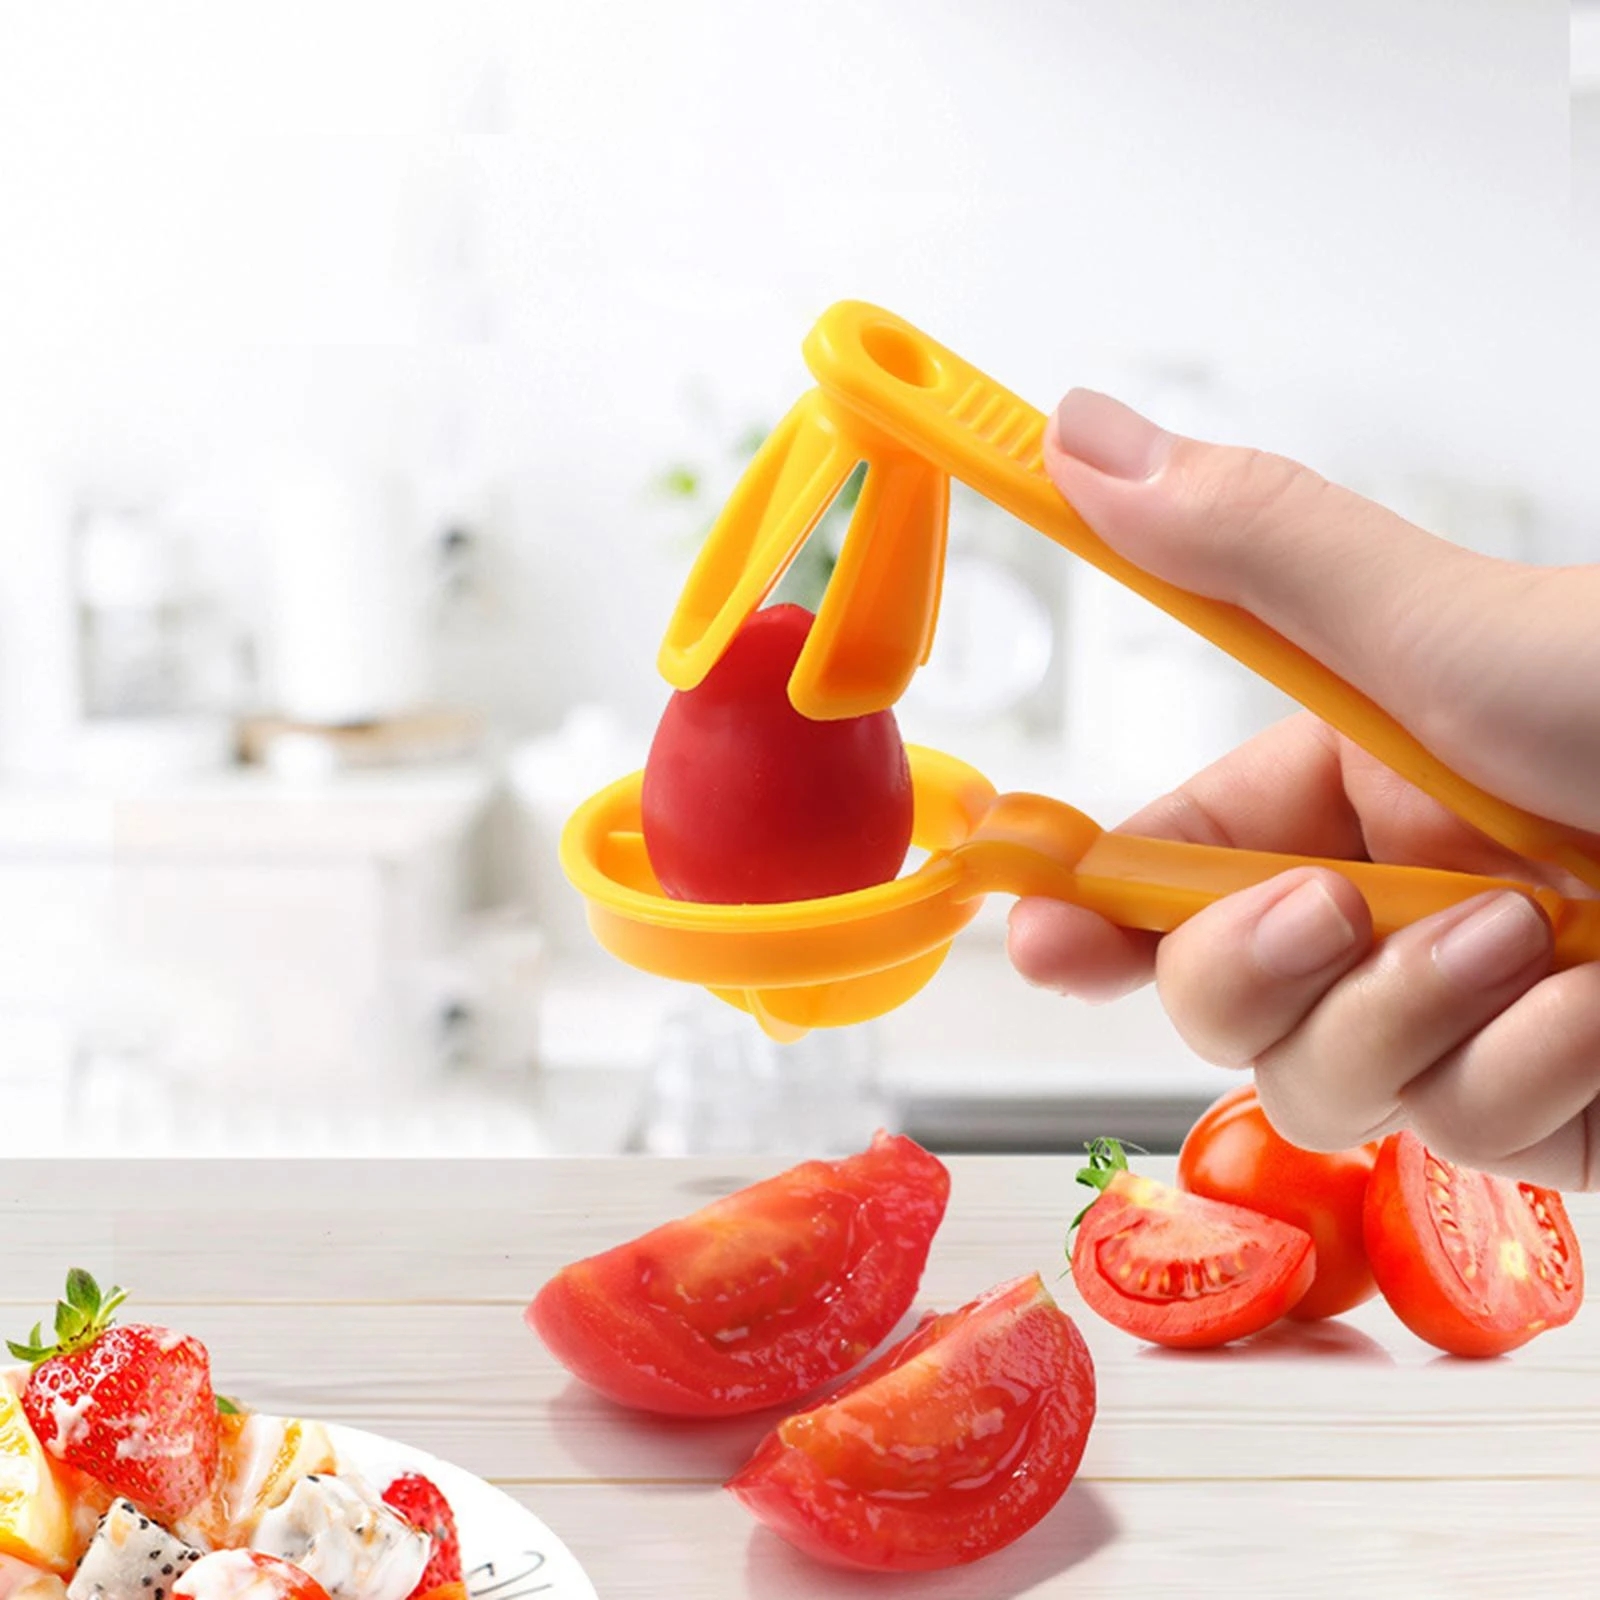 1pc Creative Kitchen Gadgets Fruit & Vegetable Tools Knife Manual